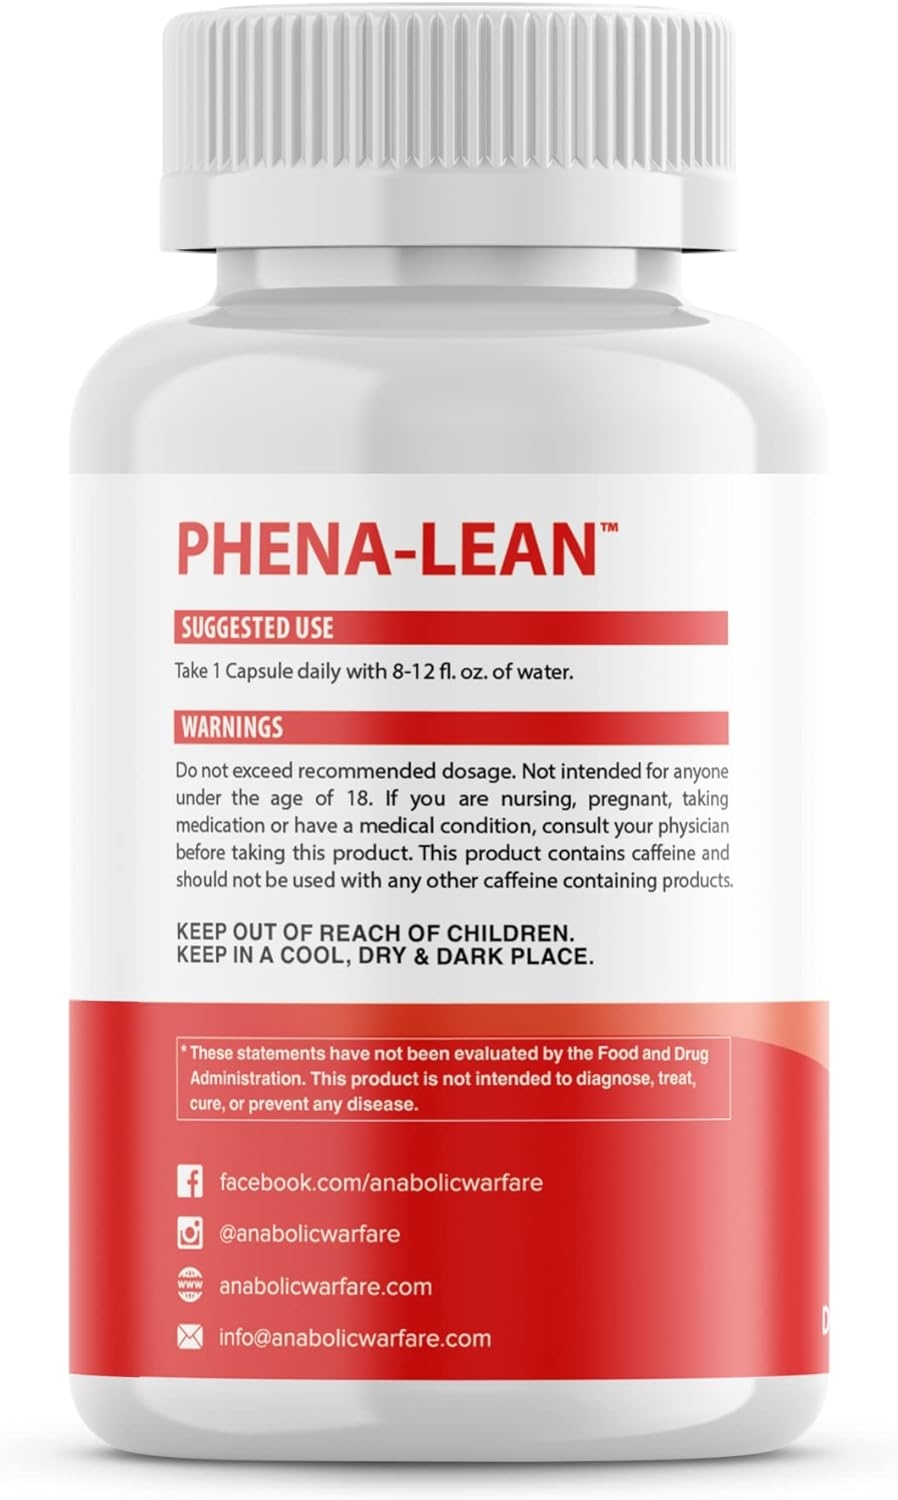 Anabolic Warfare Phena-Lean Premier Supplement from Thermogenic Body Composition Supplement – Fuel Your Fire, Supports Energy and Focus* - 60 Capsules.